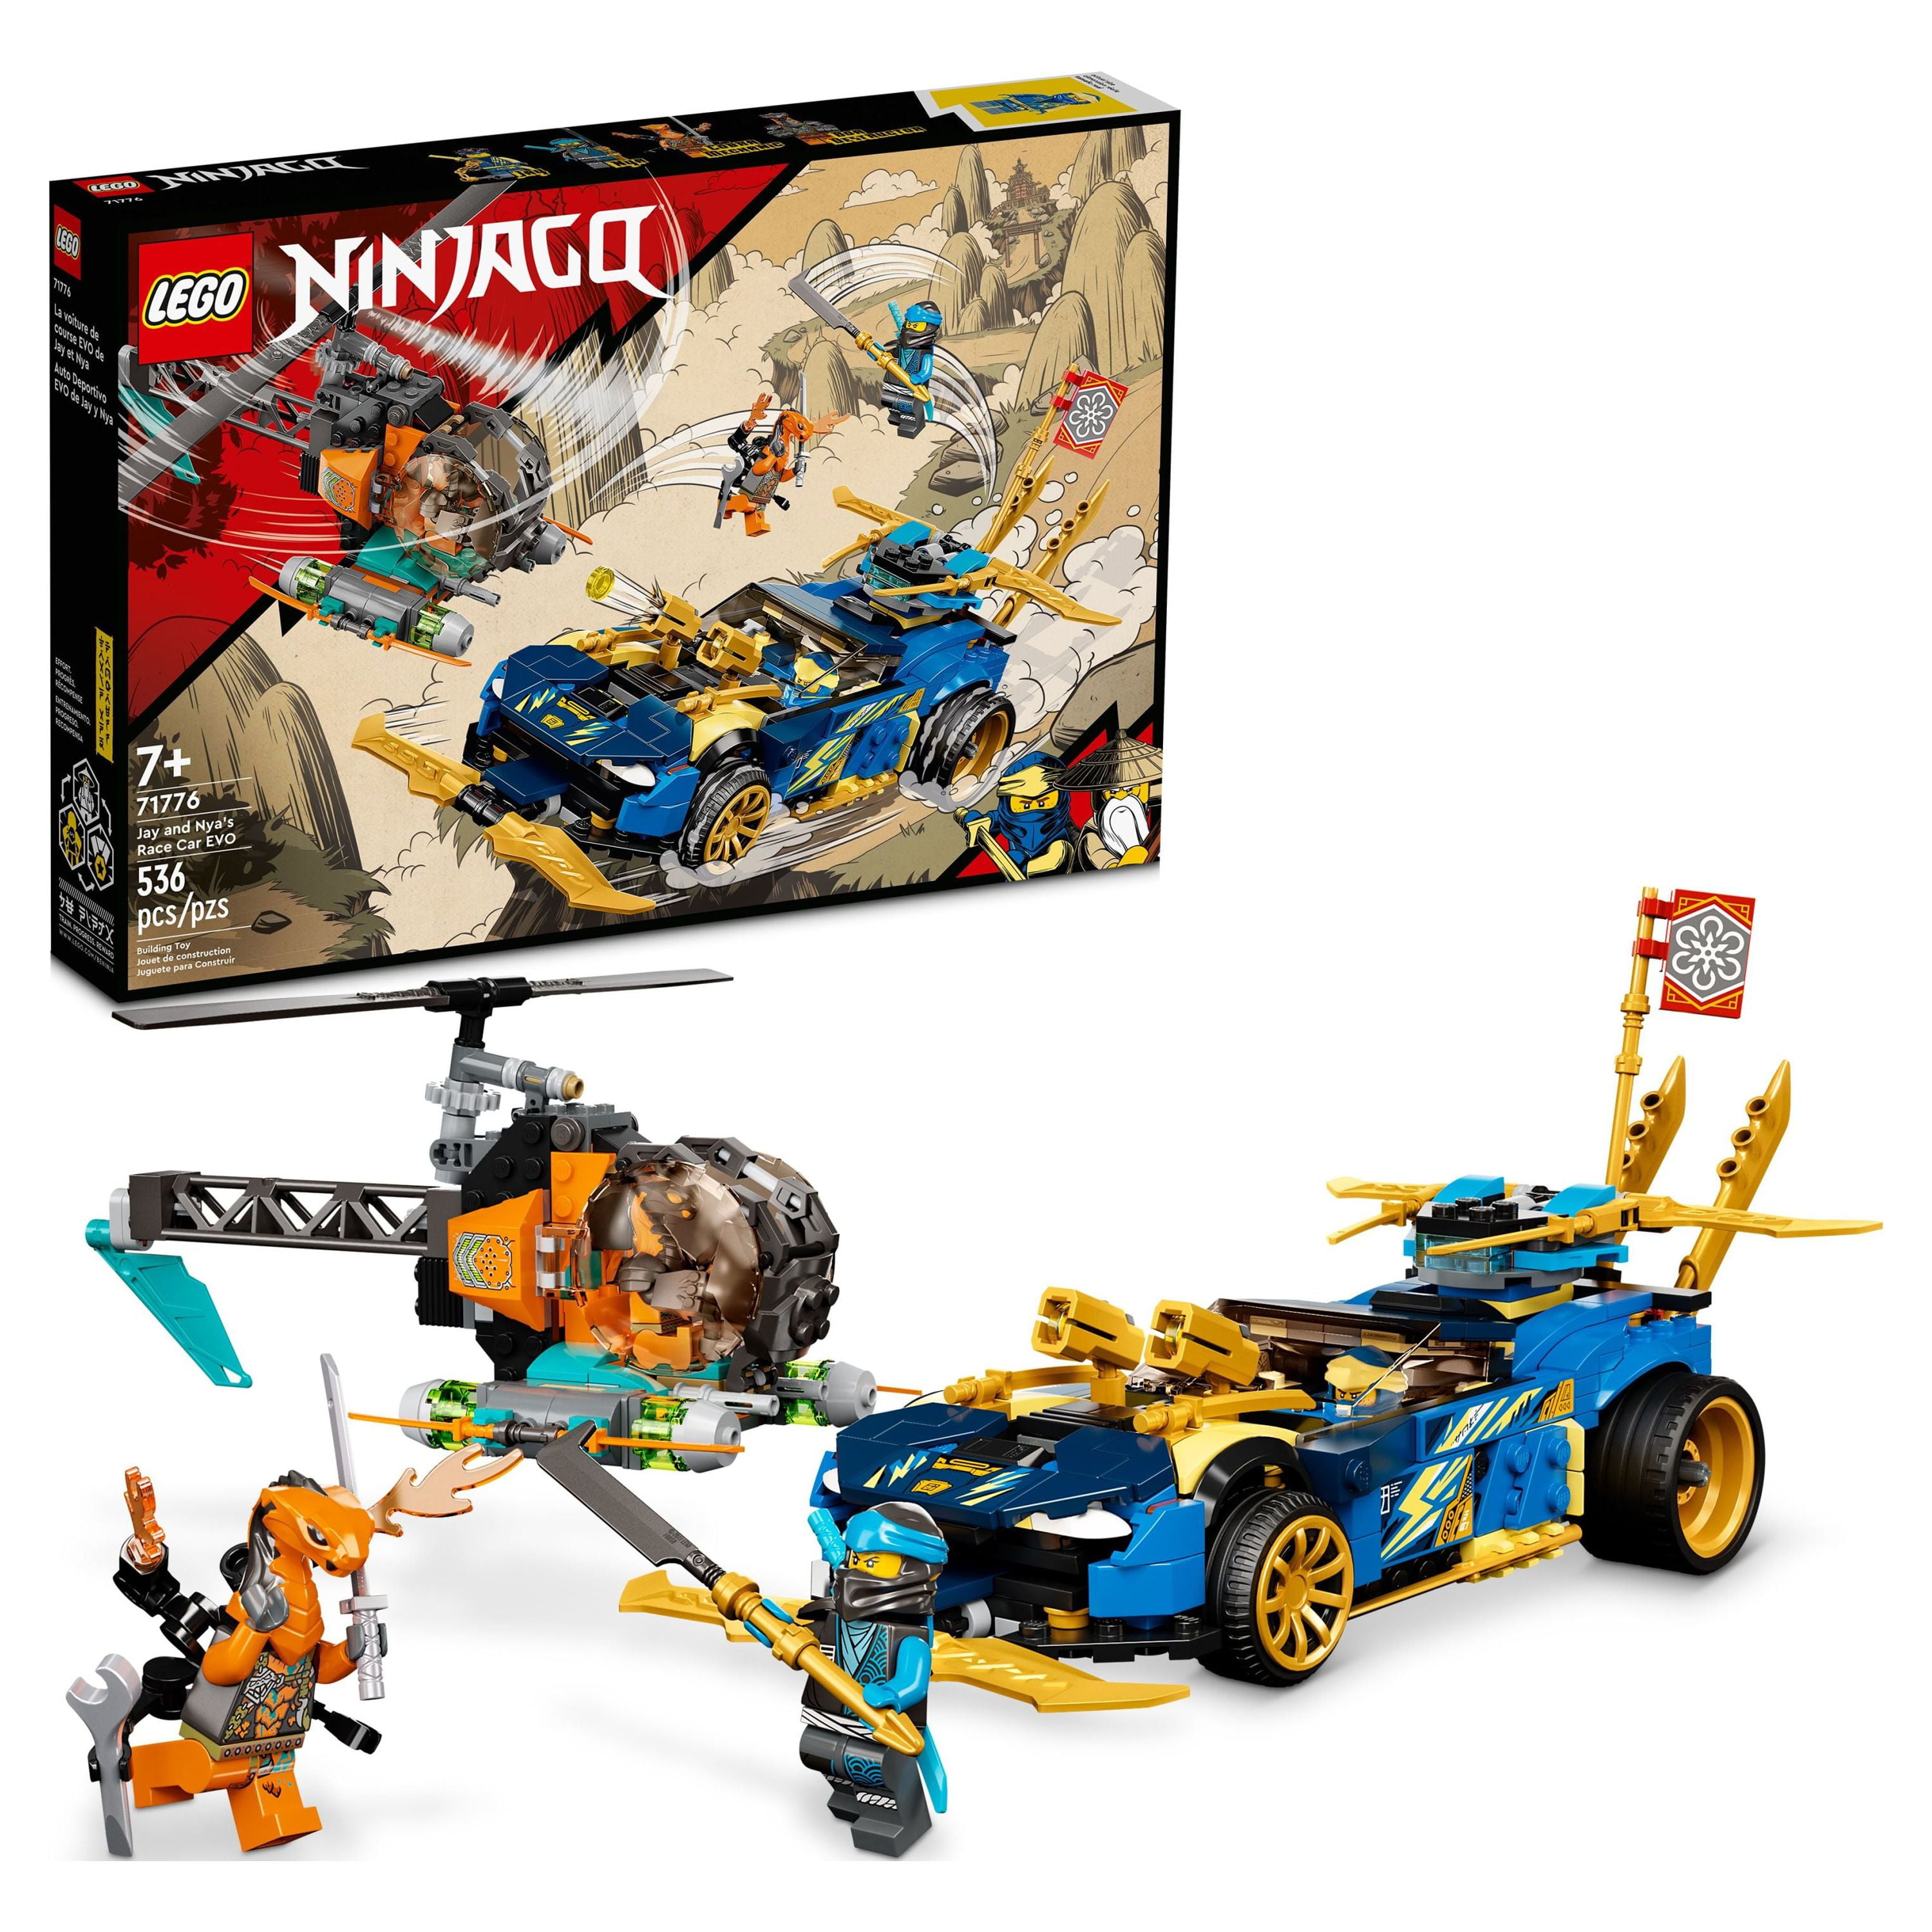 LEGO NINJAGO Jay and Nya’s Race Car EVO Set 71776 with Toy Helicopter and  Boa Snake Figure for Kids Ages 7+, Collectible Mission Banner Sets